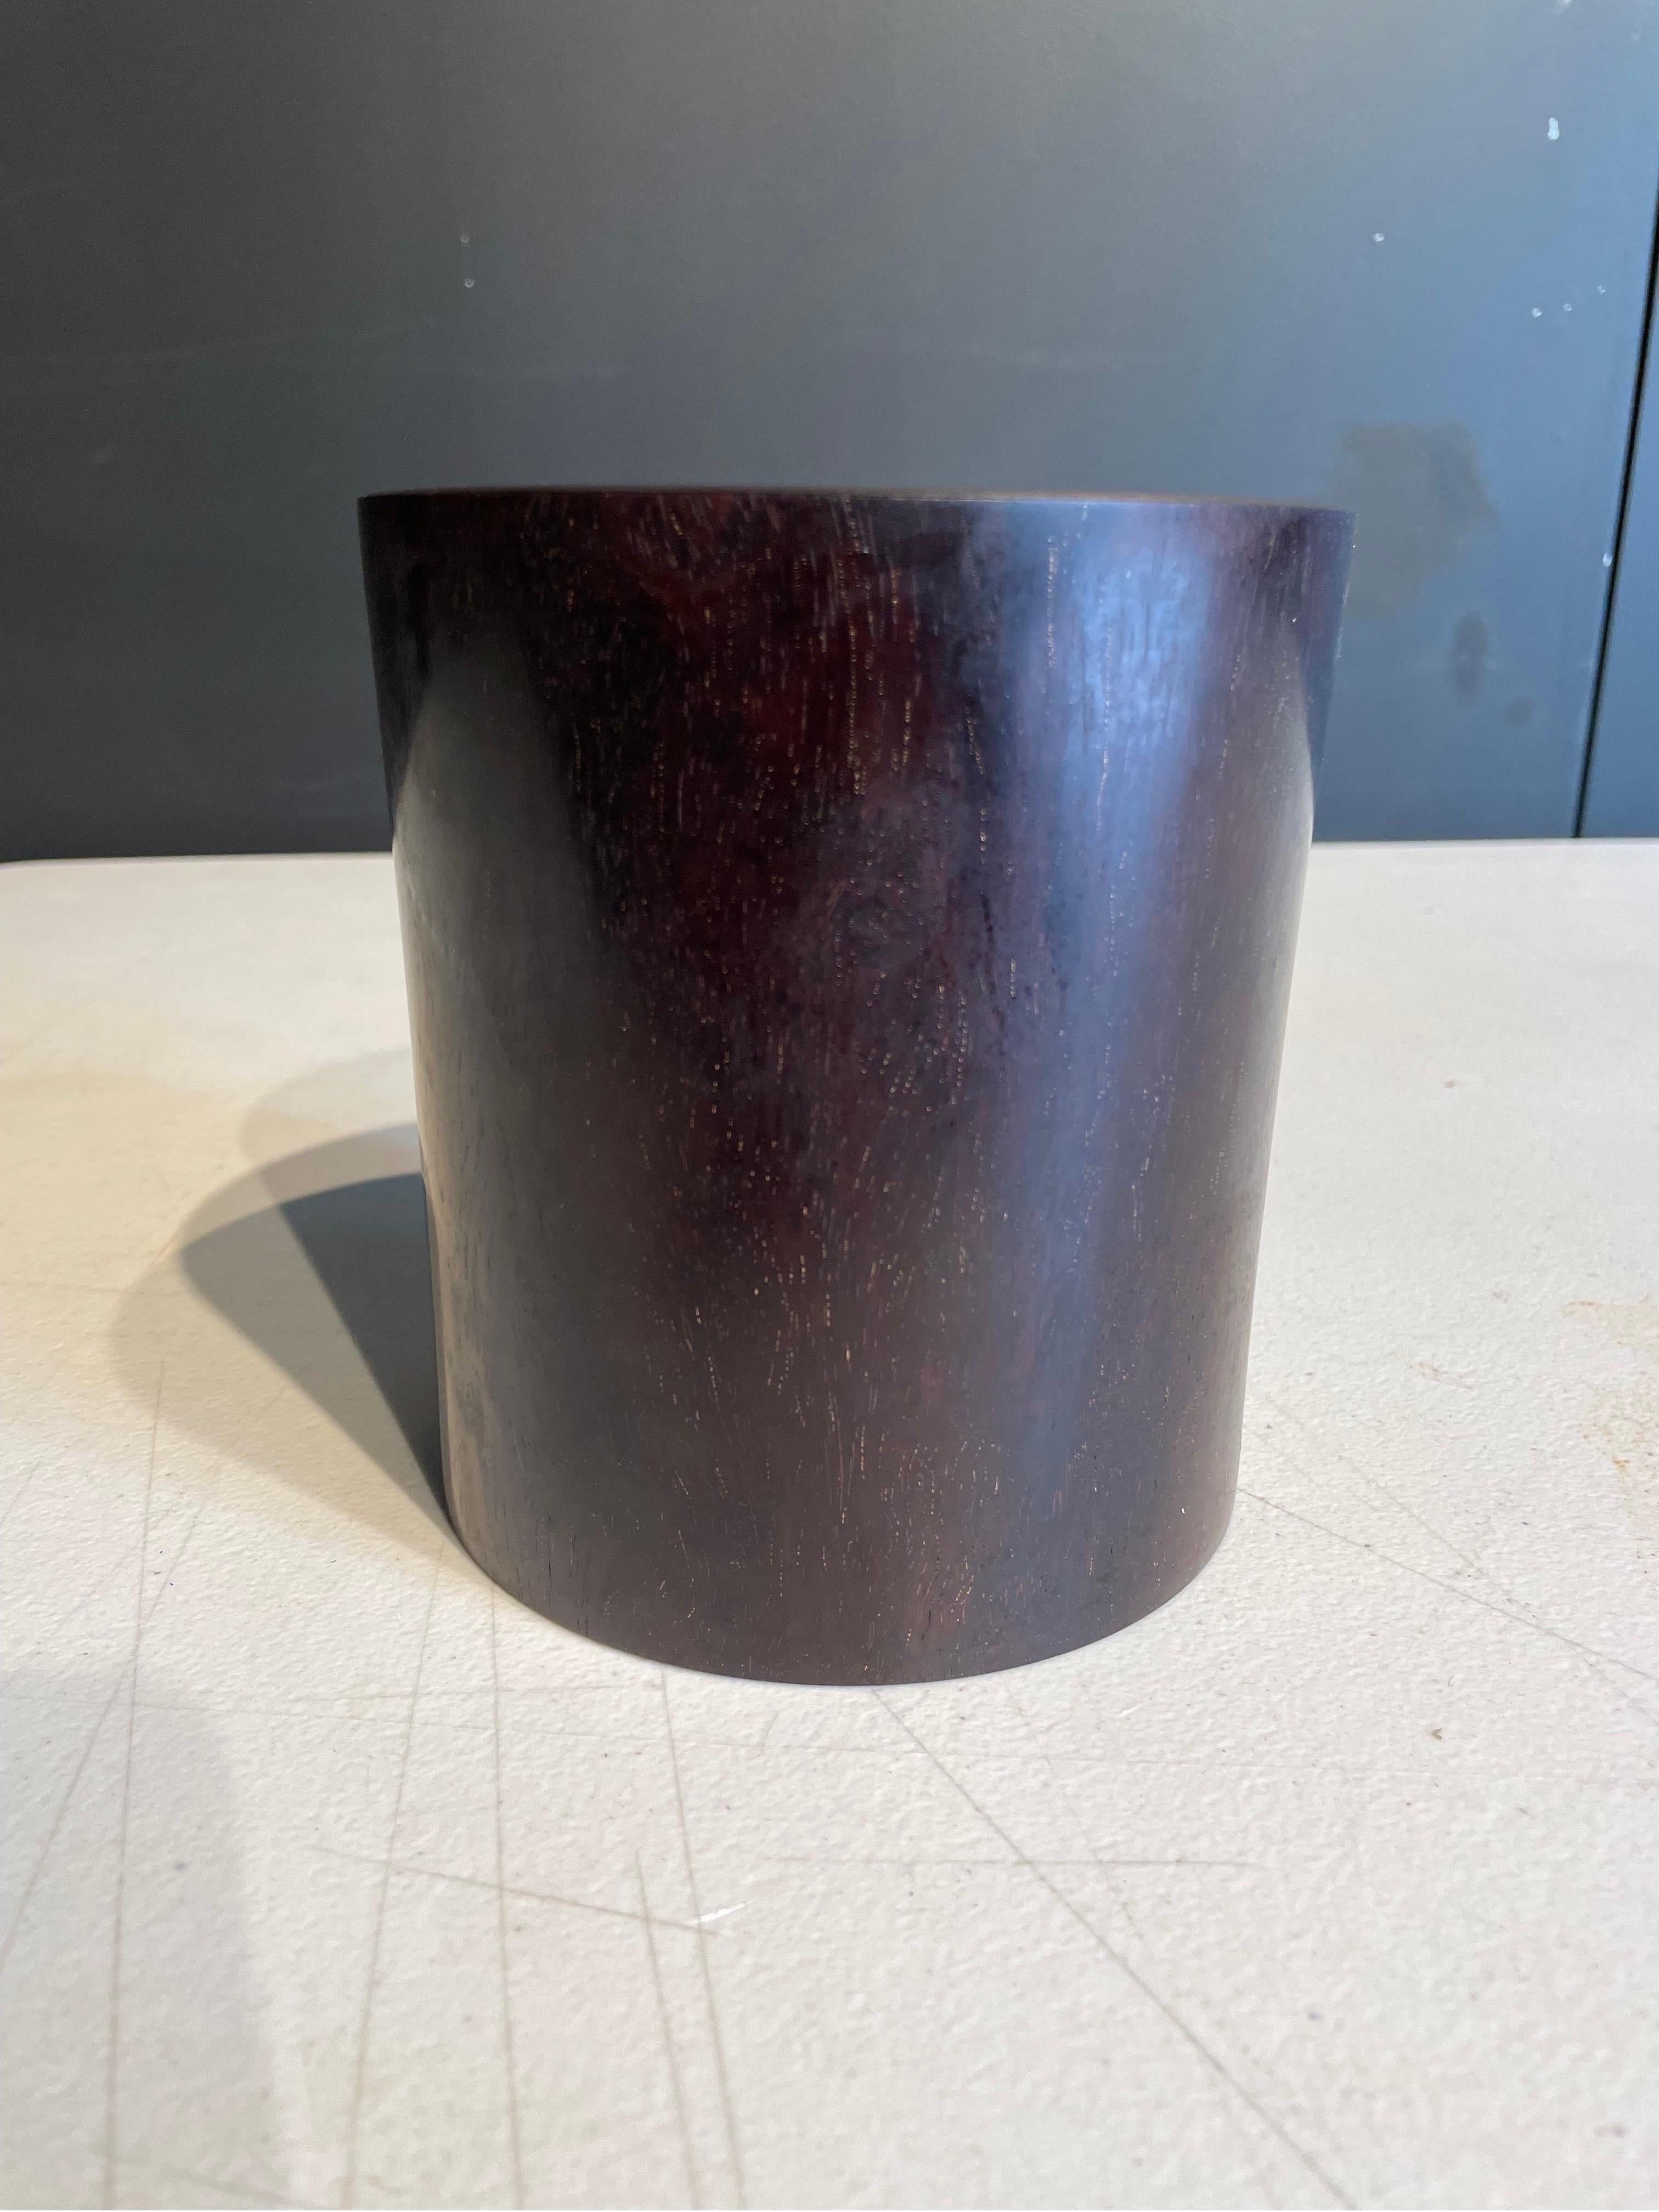 A Zitan Cylindrical Brushpot, 20th Century

Of plain form, the dark wood with even patina.

Dimension: Height: 13.5 cm Diameter: 12.5 cm

Provenance: Private New South Wales Collection.